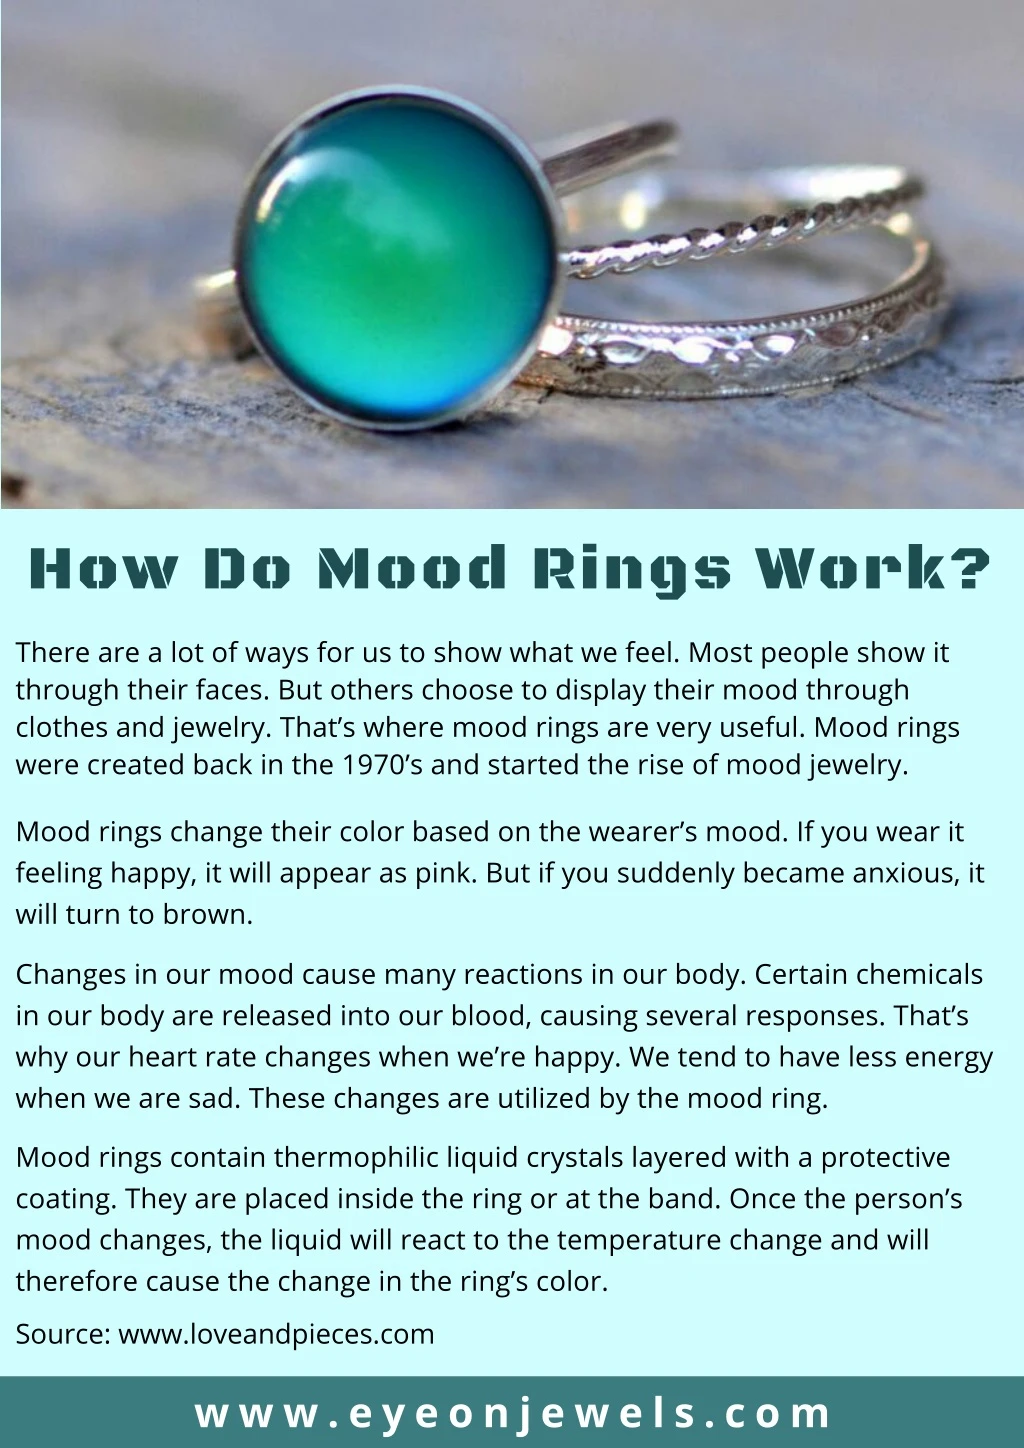 PPT - How Do Mood Rings Work? PowerPoint Presentation, free download ...